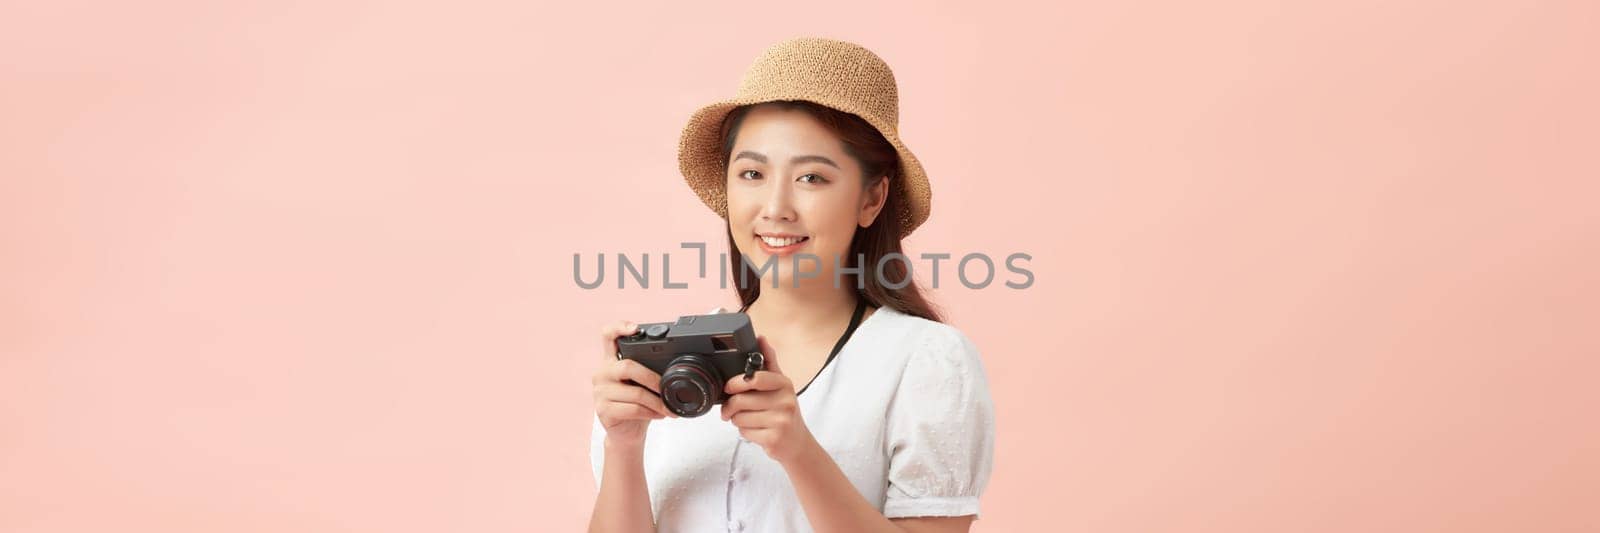 Tourist woman wearing hat with photo camera isolated on banner background